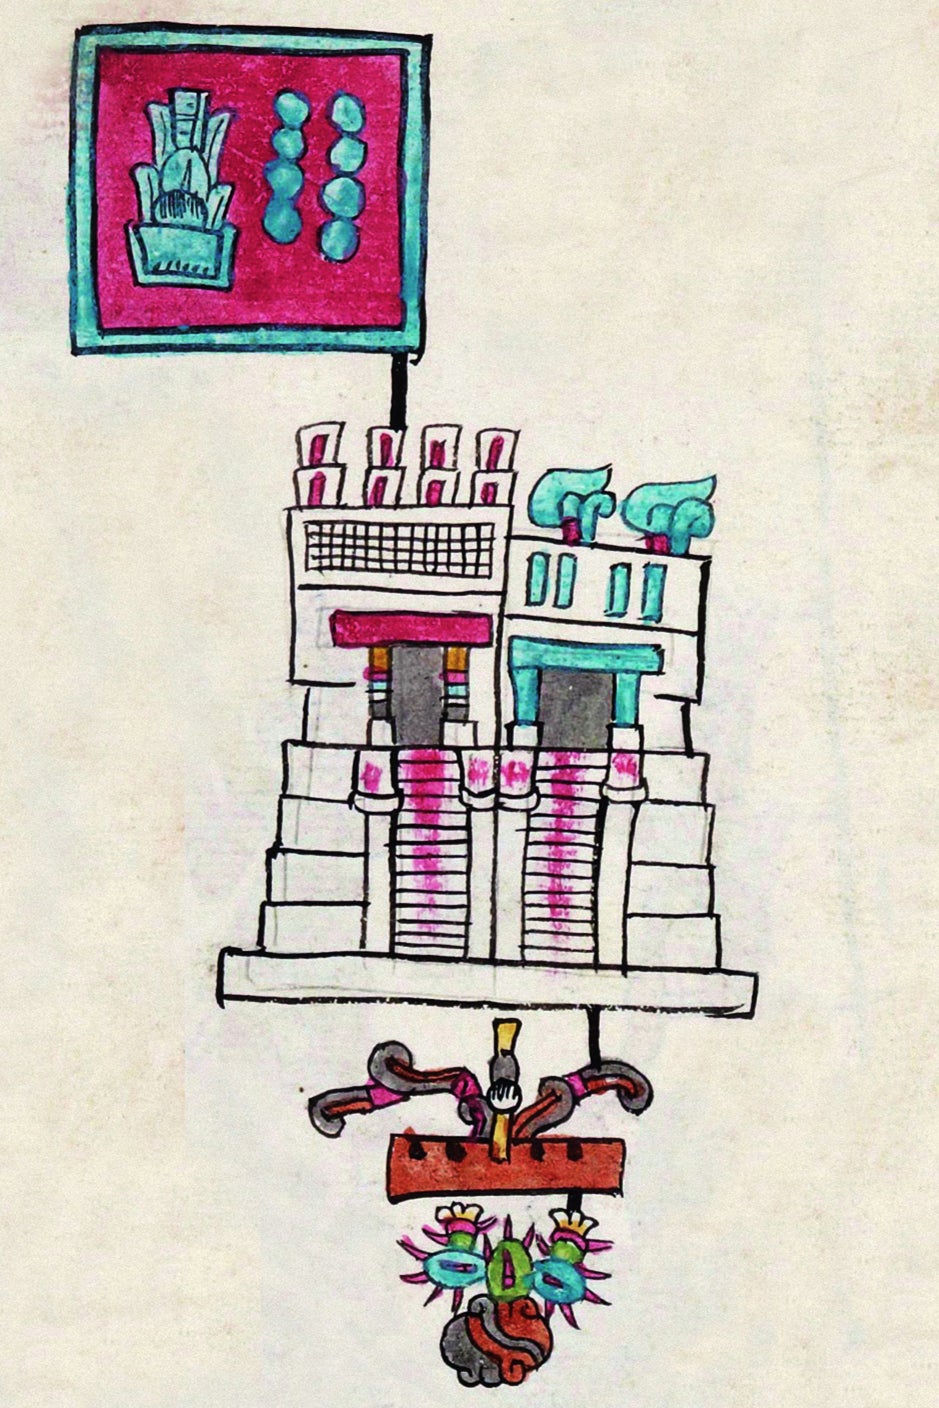 This typical Aztec hieroglyphic sentence (from a document known as the Codex Telleriano-Remensis, now held in the National Library of France, states that "[In] the year [called] '8 Acatl' [literally '8 Reed'], the Great Temple was inaugurated in [the Aztec capital] Tenochtitlan". The top element denotes the year (1487). Below that is the sign for 'Great Temple'. Below that is the verb 'inaugurate' - and at the bottom is the sign for the city of Tenochtitlan.